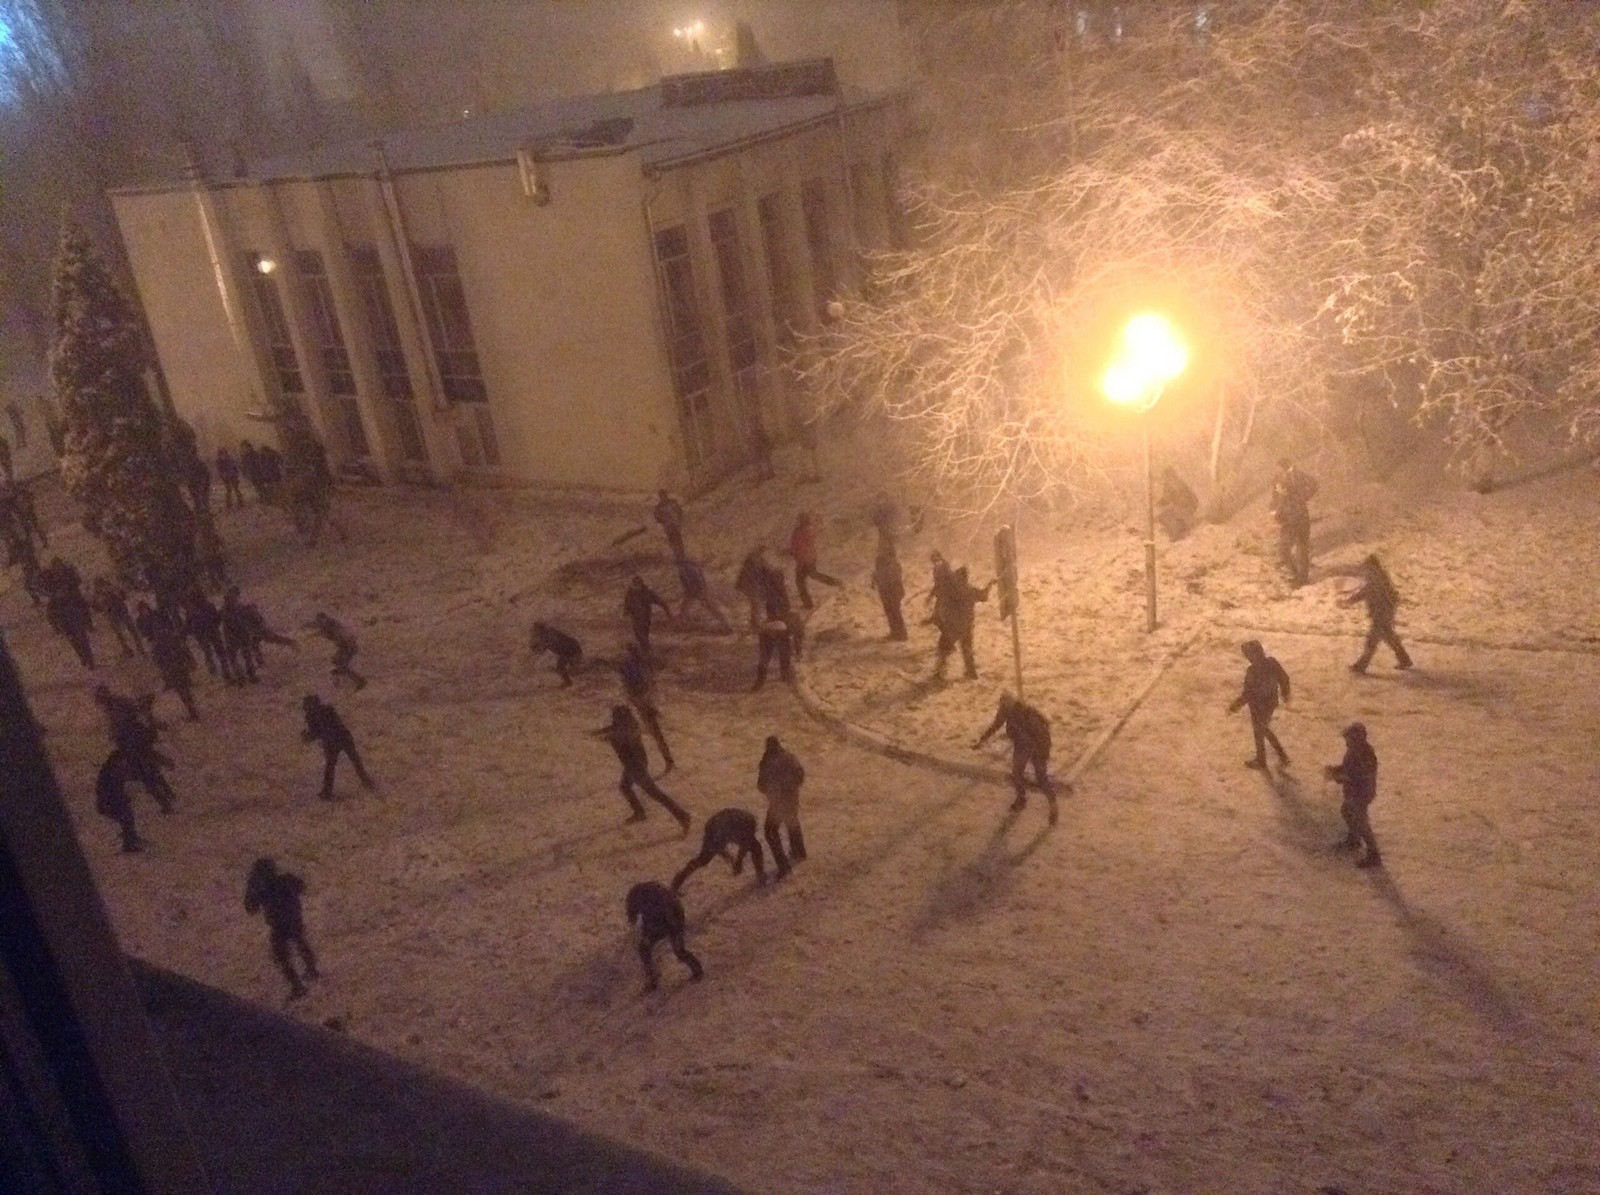 Battle of the Snow - My, Students, Snow, Winter, Snowballs, Video